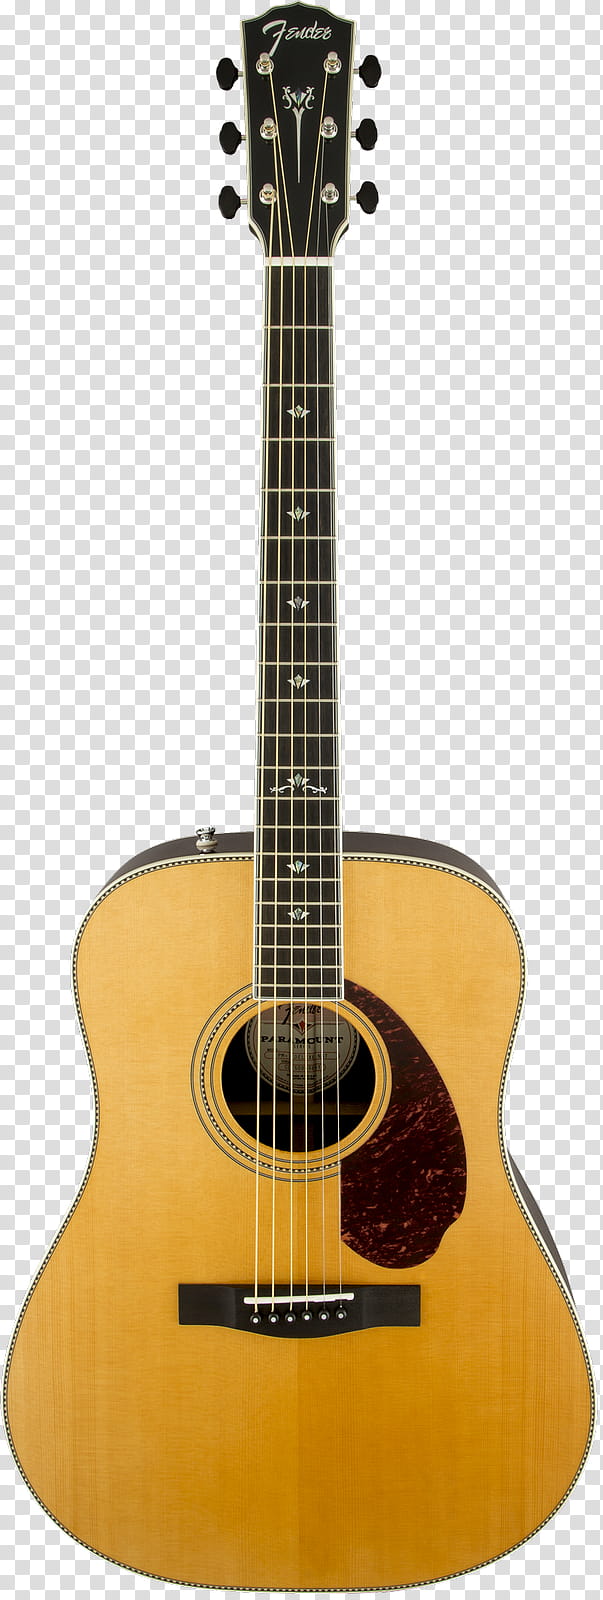 Guitar, Dreadnought, Acousticelectric Guitar, Fender Paramount Series Pm2 Standard, Acoustic Guitar, Fender Newporter, Fender Cd60ce Acousticelectric Guitar, Taylor Baby Taylor Mahogany transparent background PNG clipart